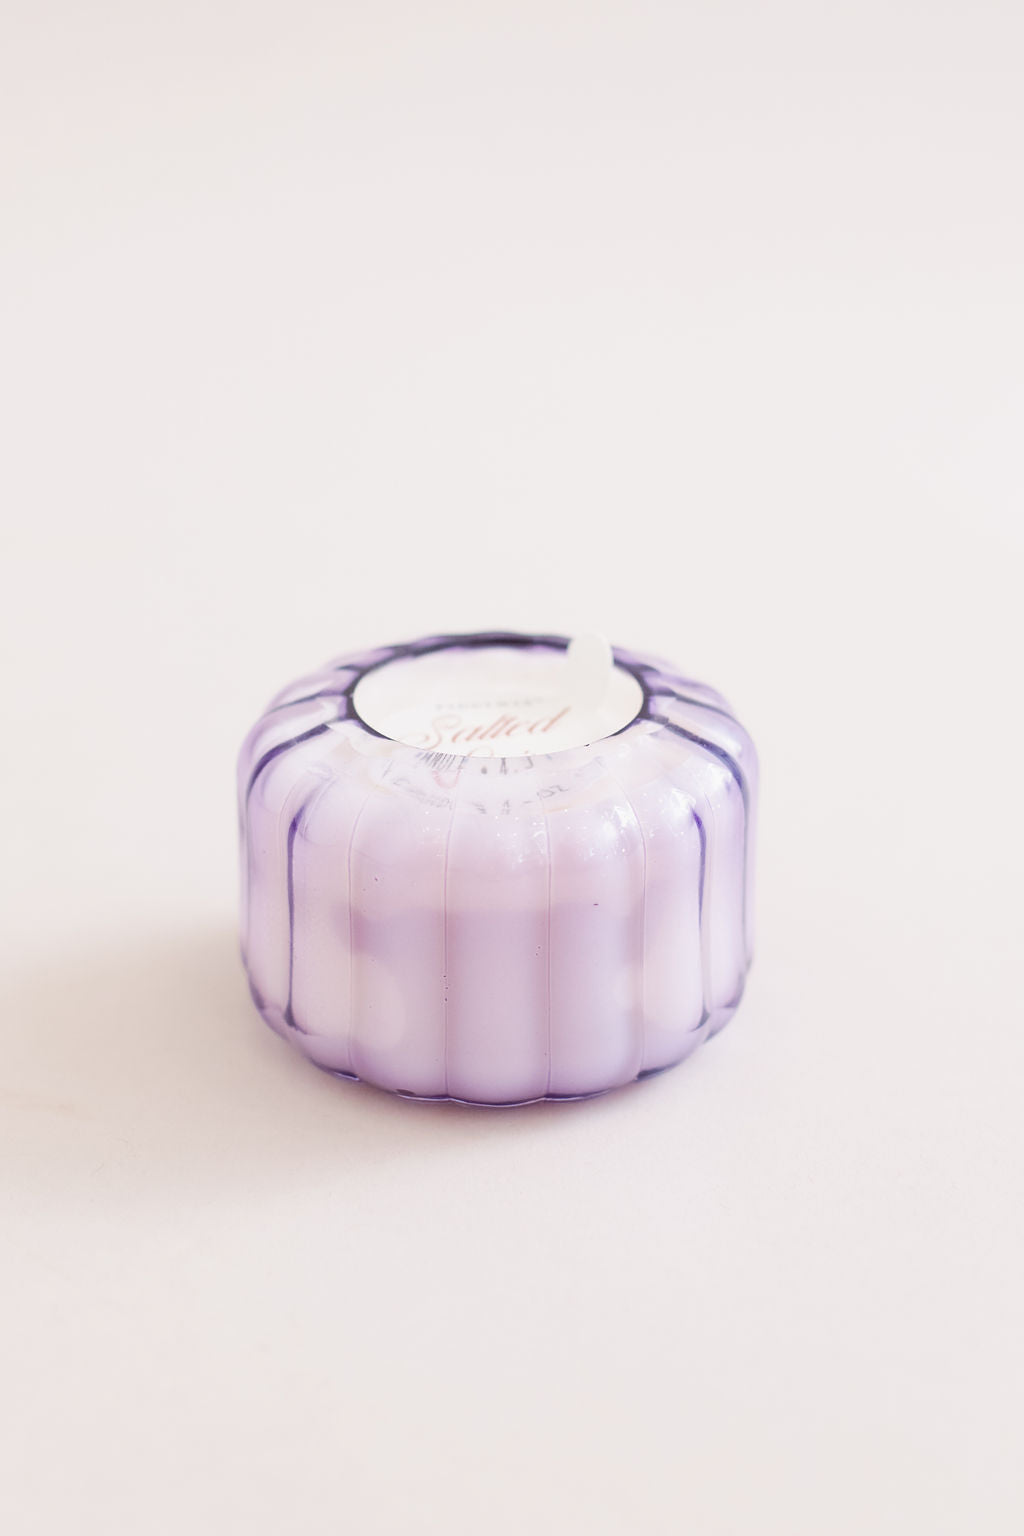 Paddywax | Ripple 4.5 oz. Candle | Salted Iris - Poppy and Stella